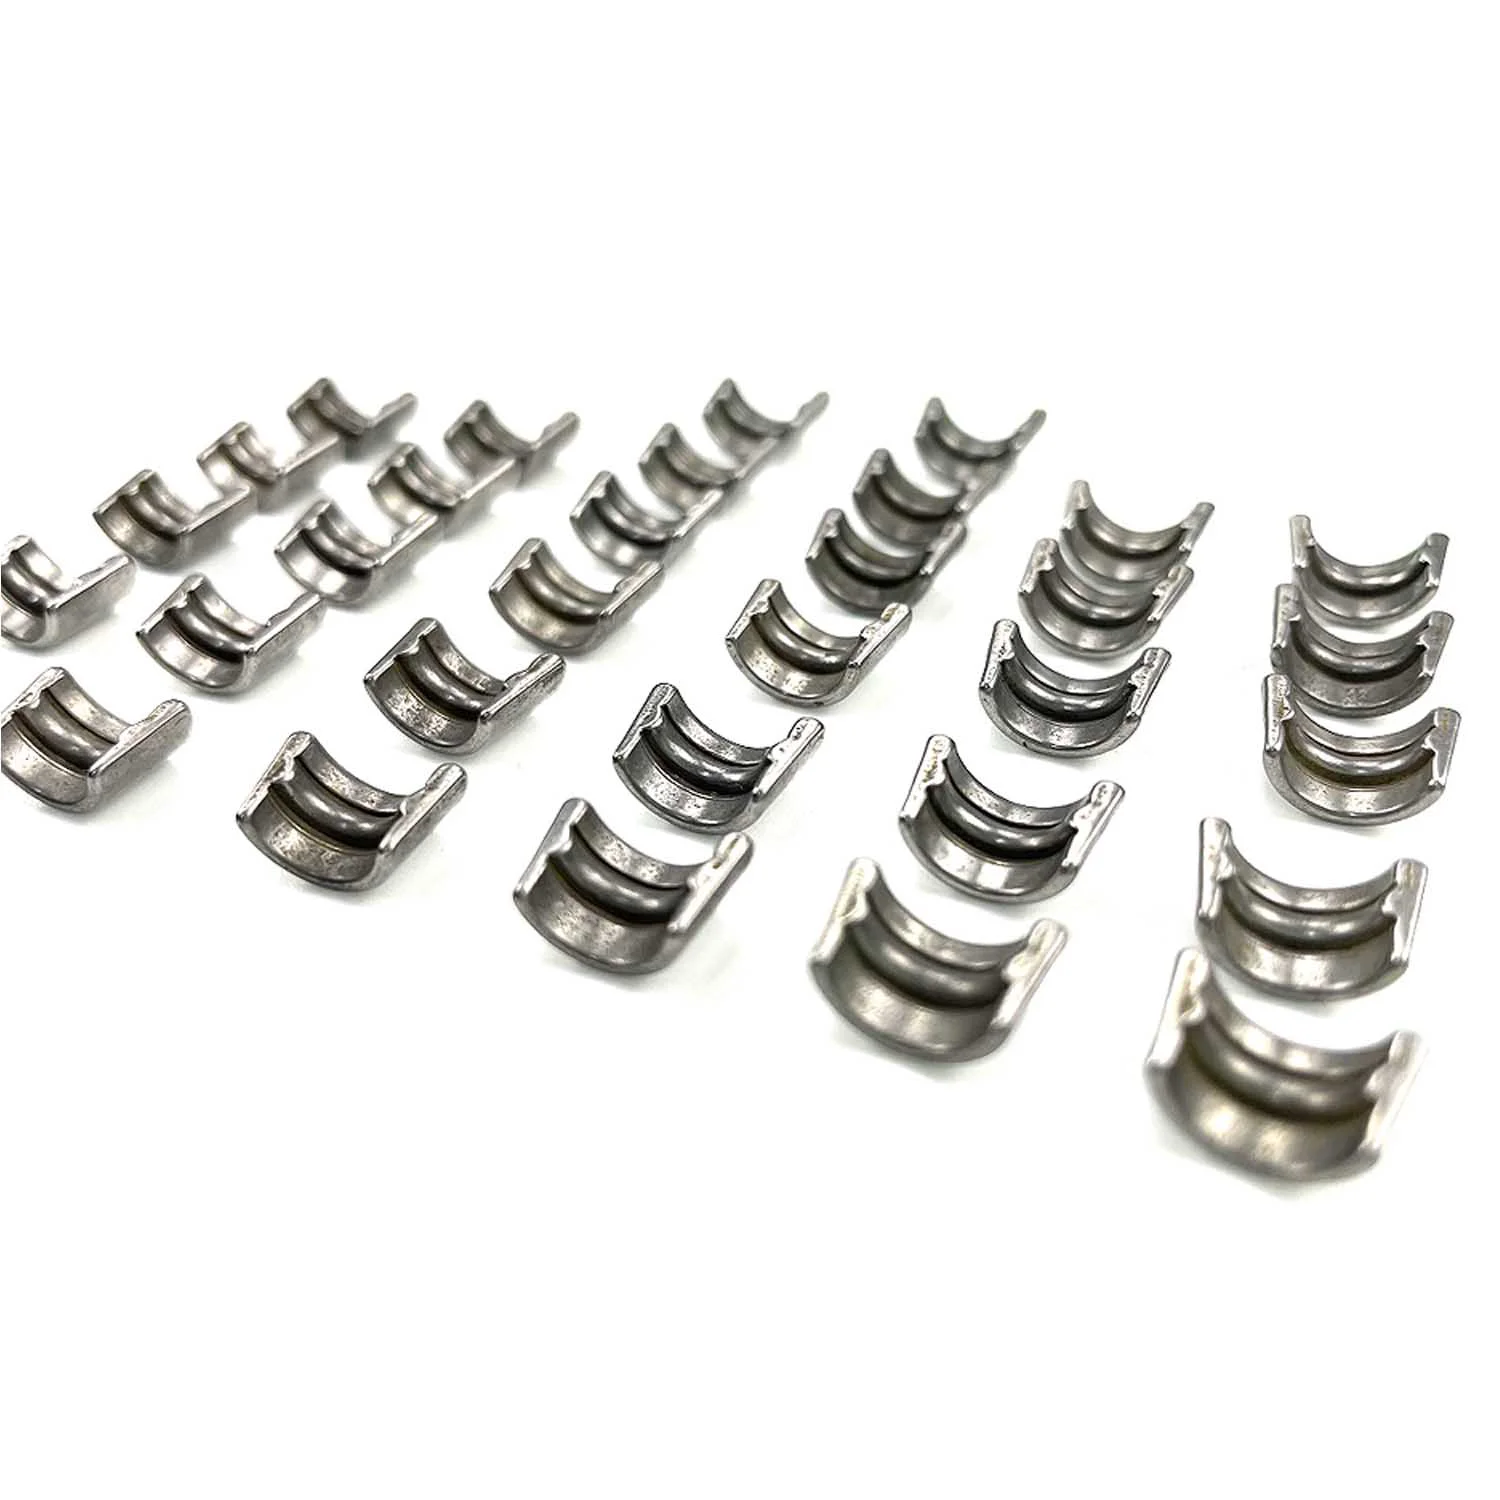 Zeroclearance New Z28 Style Valve Spring Retainer Lock Set for Chevy 400 350 327 307 305 283 images - 6